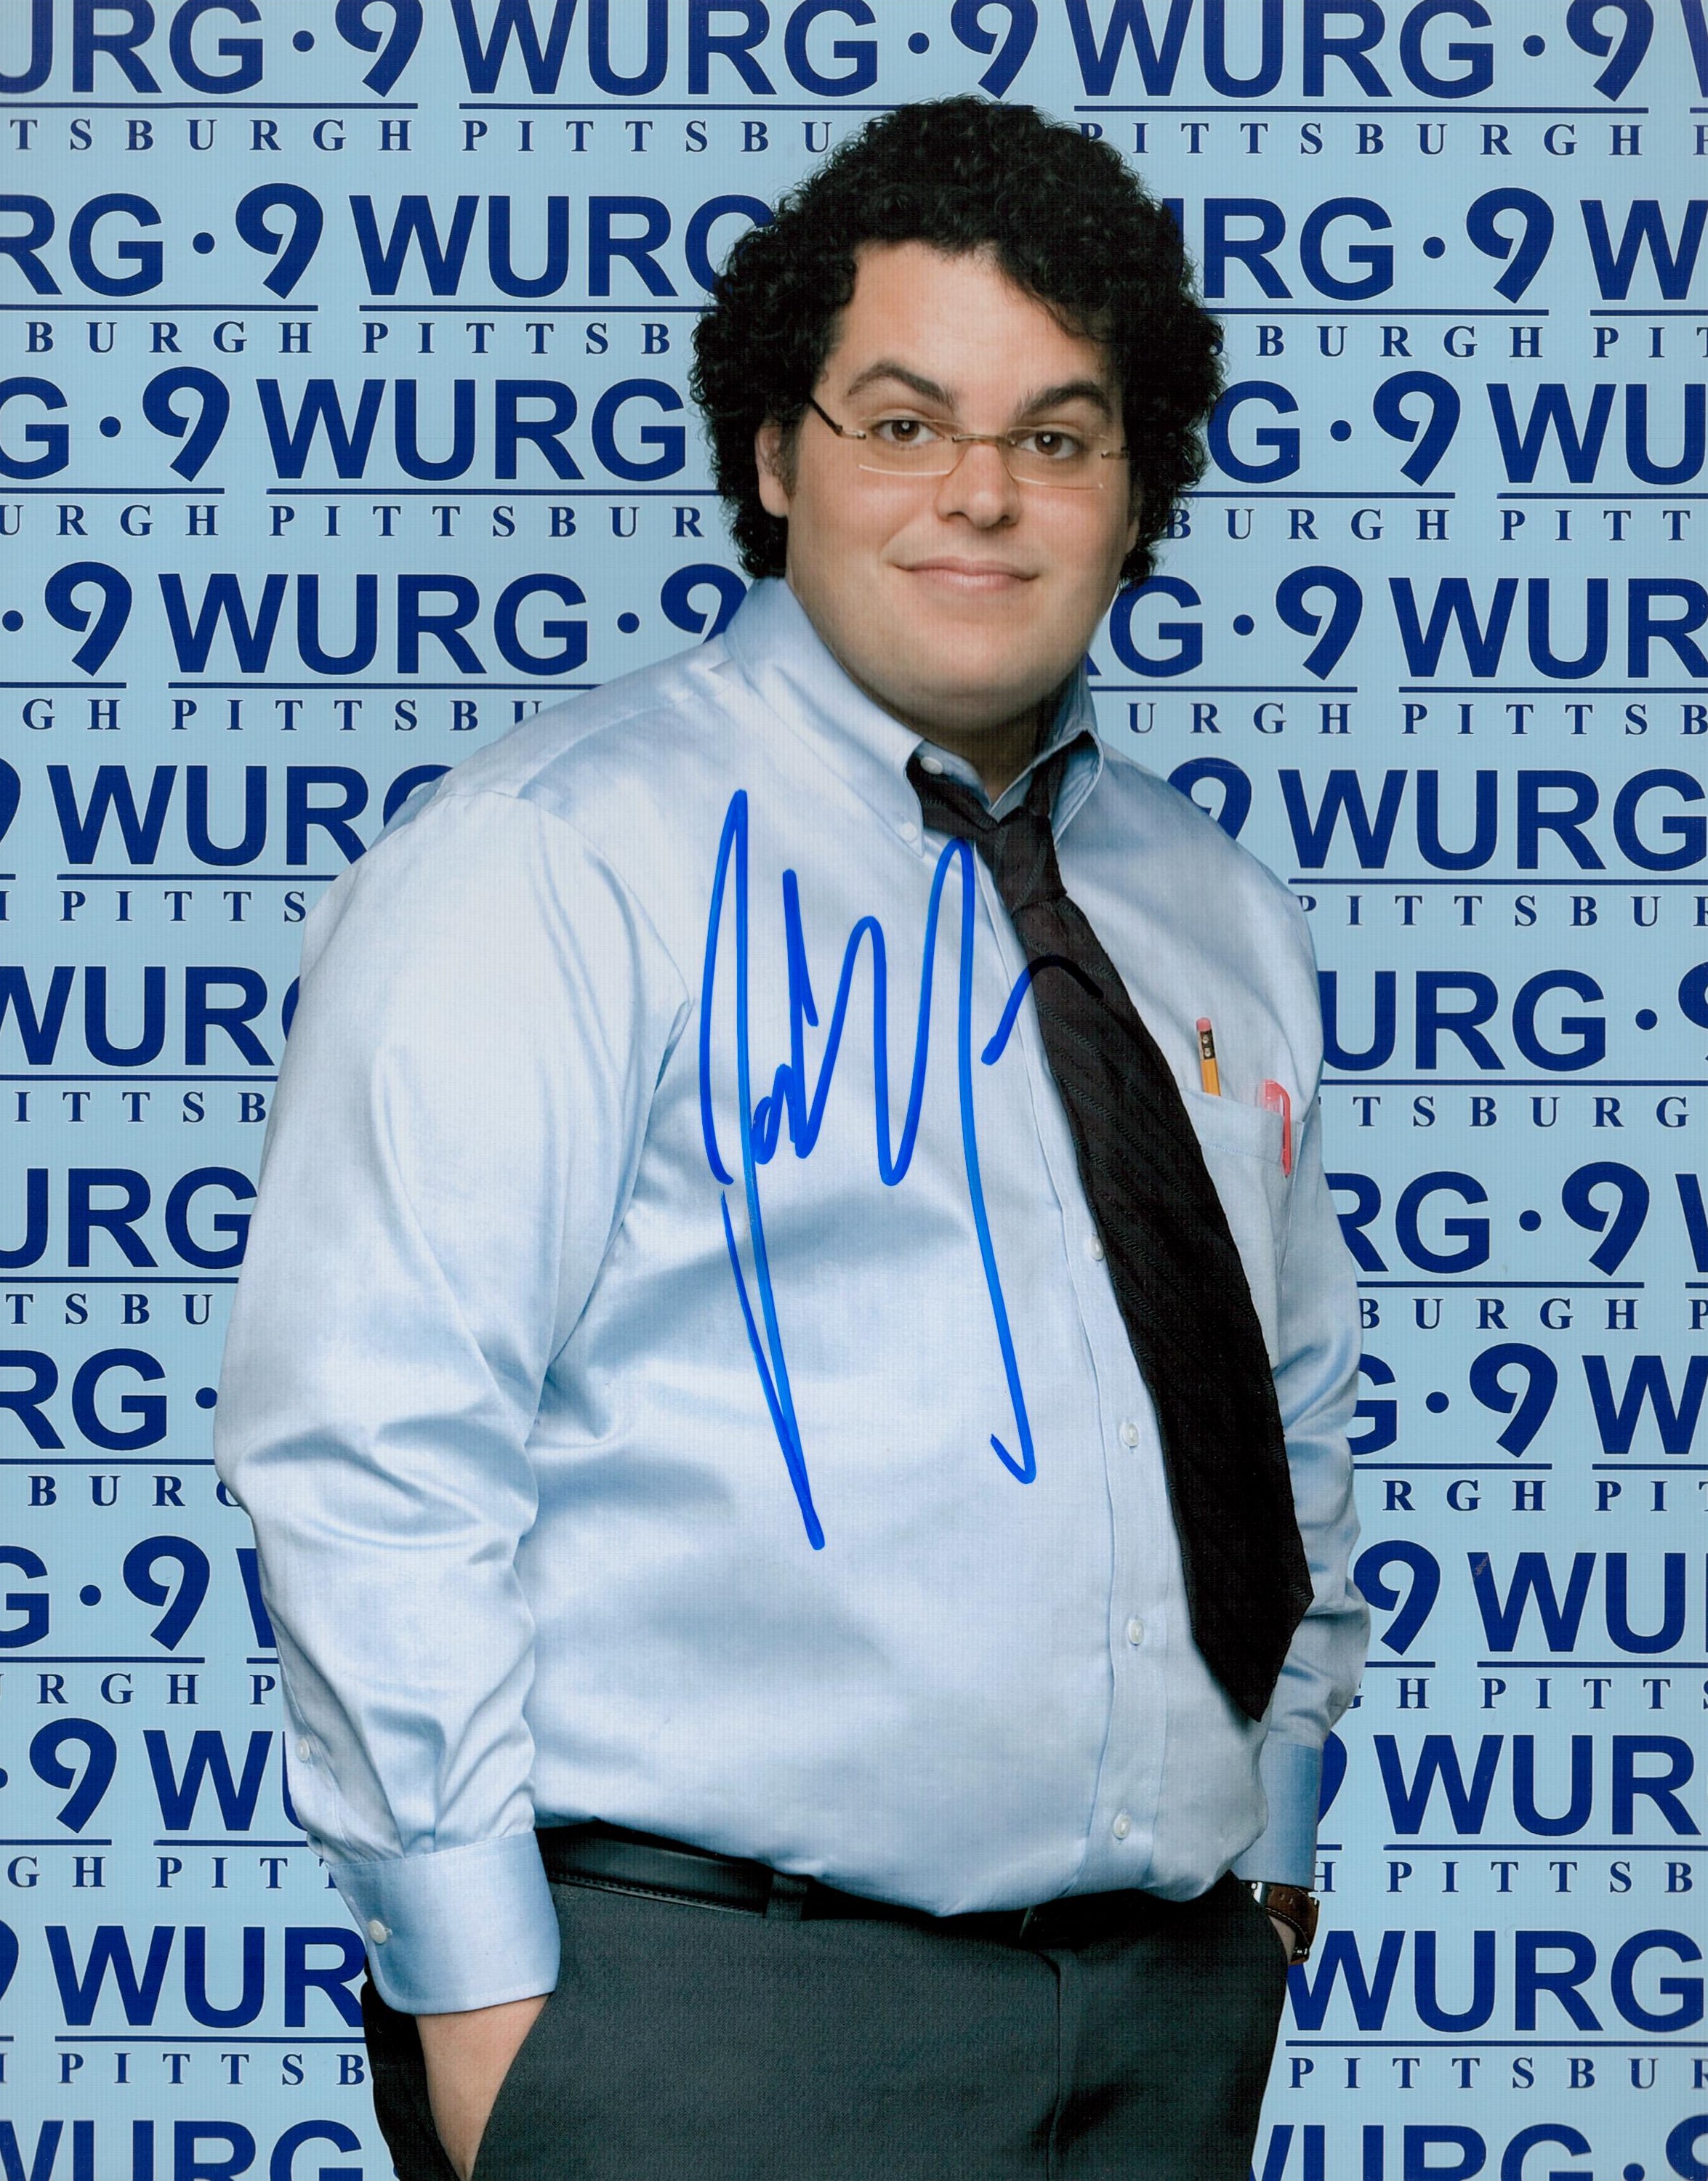 Josh Gad signed 10x8 colour photo. Gad is an American actor. He is known for voicing Olaf in the